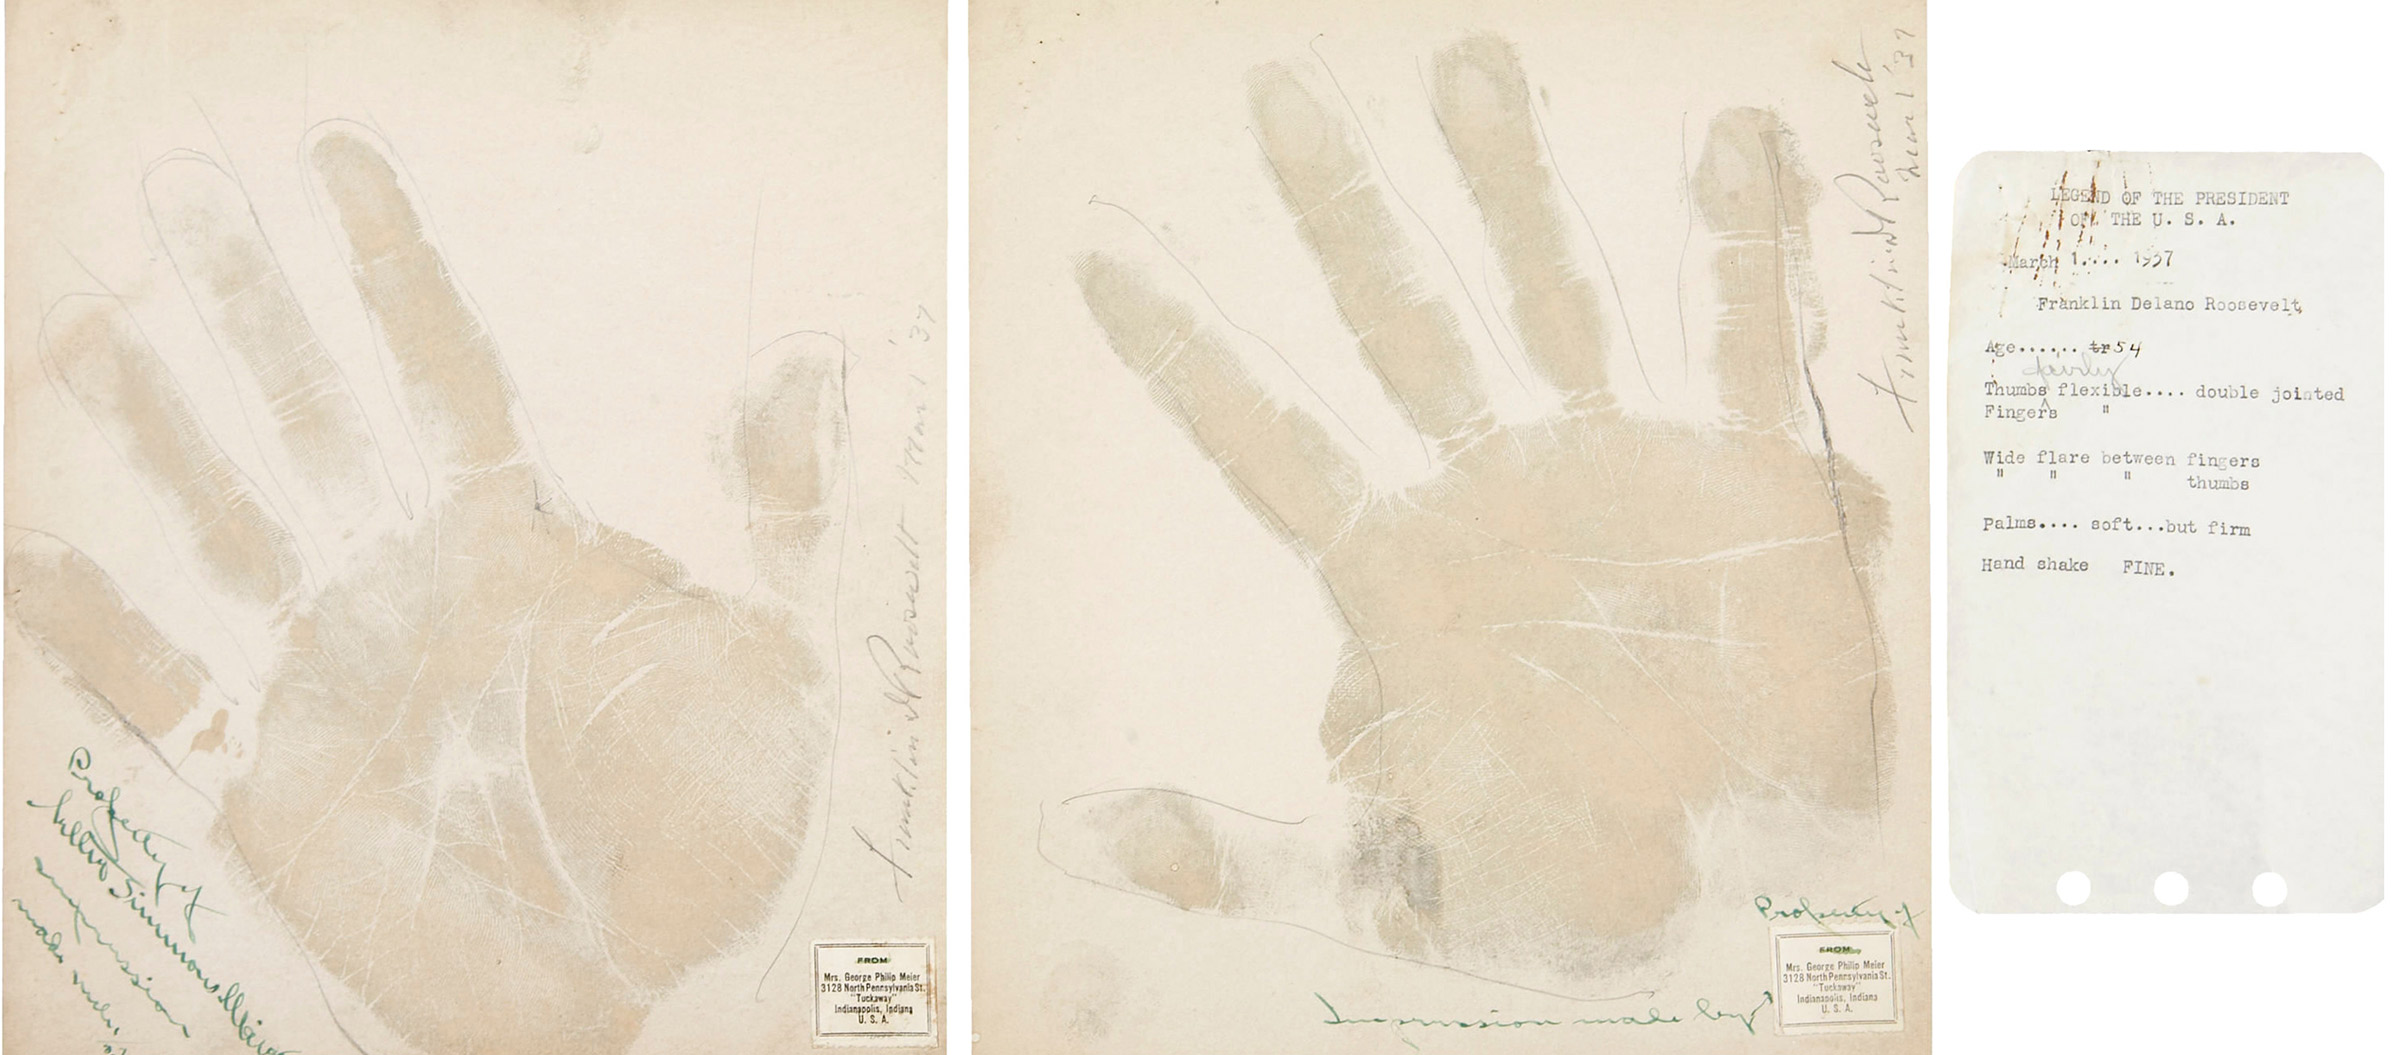 FDR's hand-print taken during a 1937 palm-reading session (Heritage Auctions)